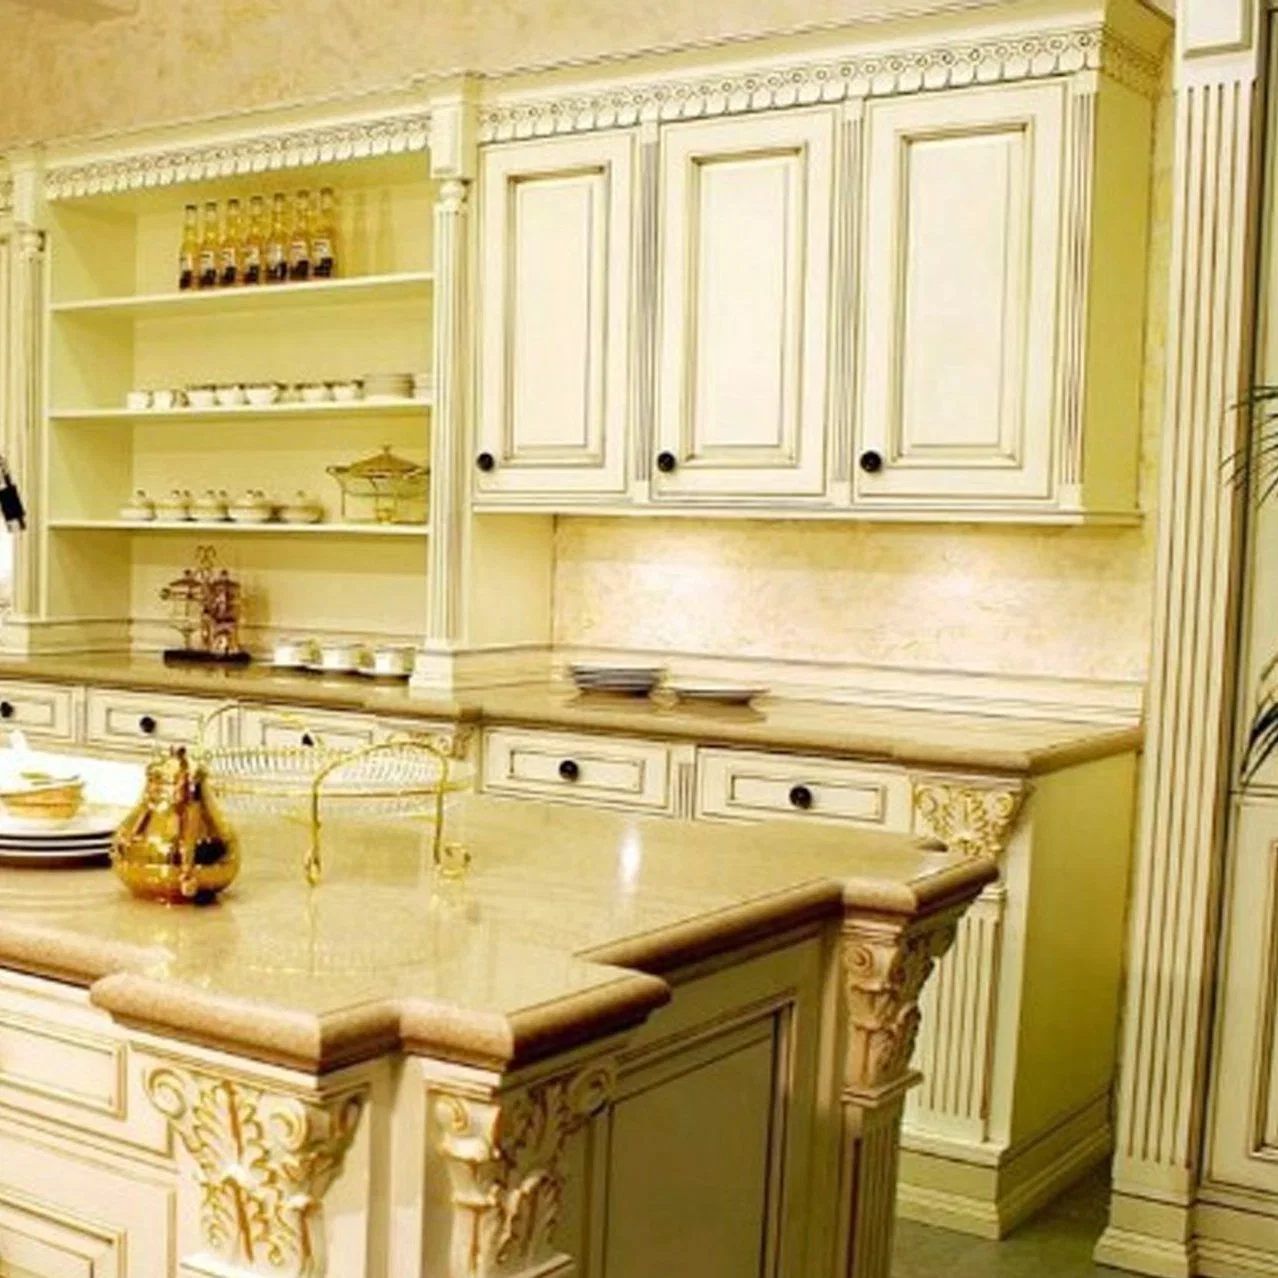 Made in China, Chinese Cabinet Factory, Customized Kitchen Furniture, Painted Cabinets, Solid Wood European Style Cabinets, and Raw Wood Cabinets